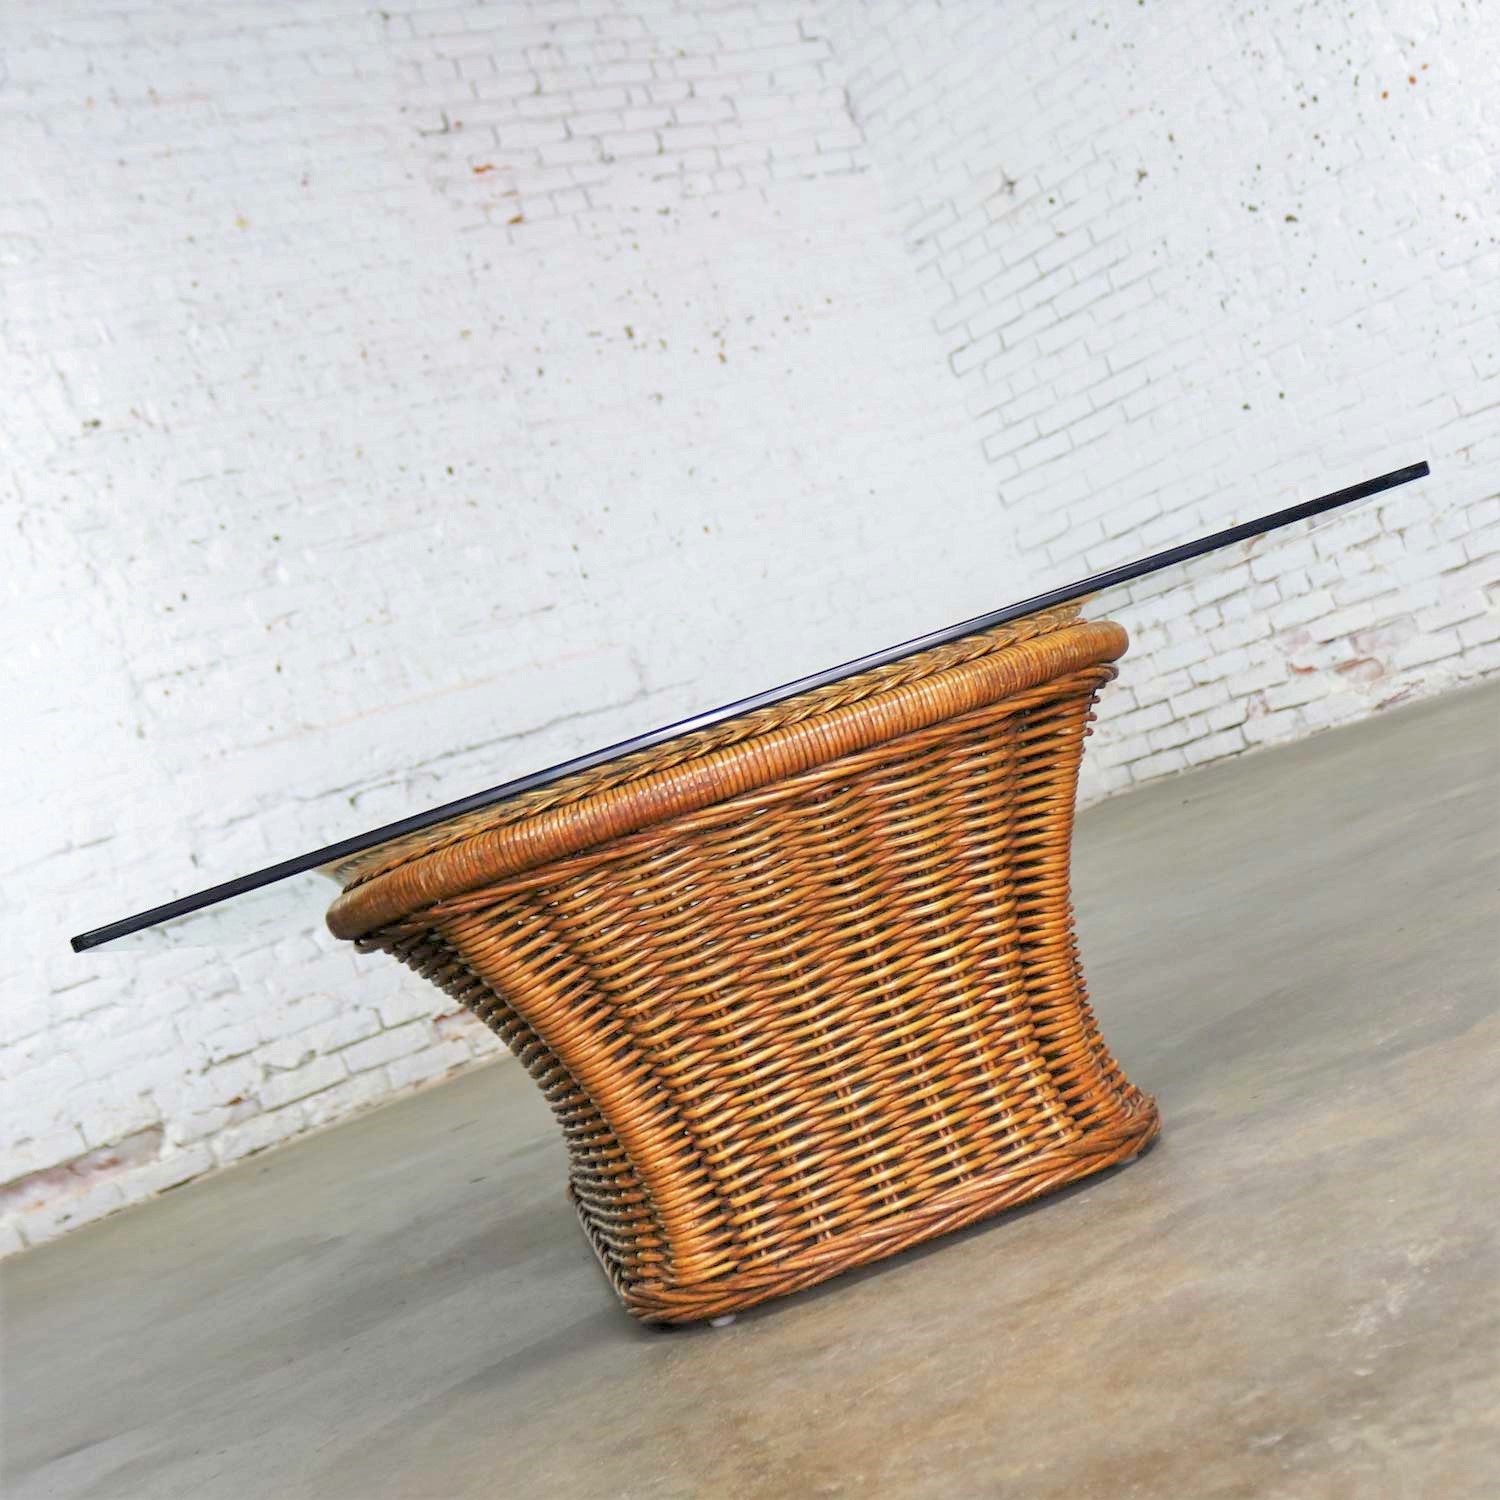 Vintage Organic Modern Woven Wicker Rattan Coffee Table with Rectangular Glass Top